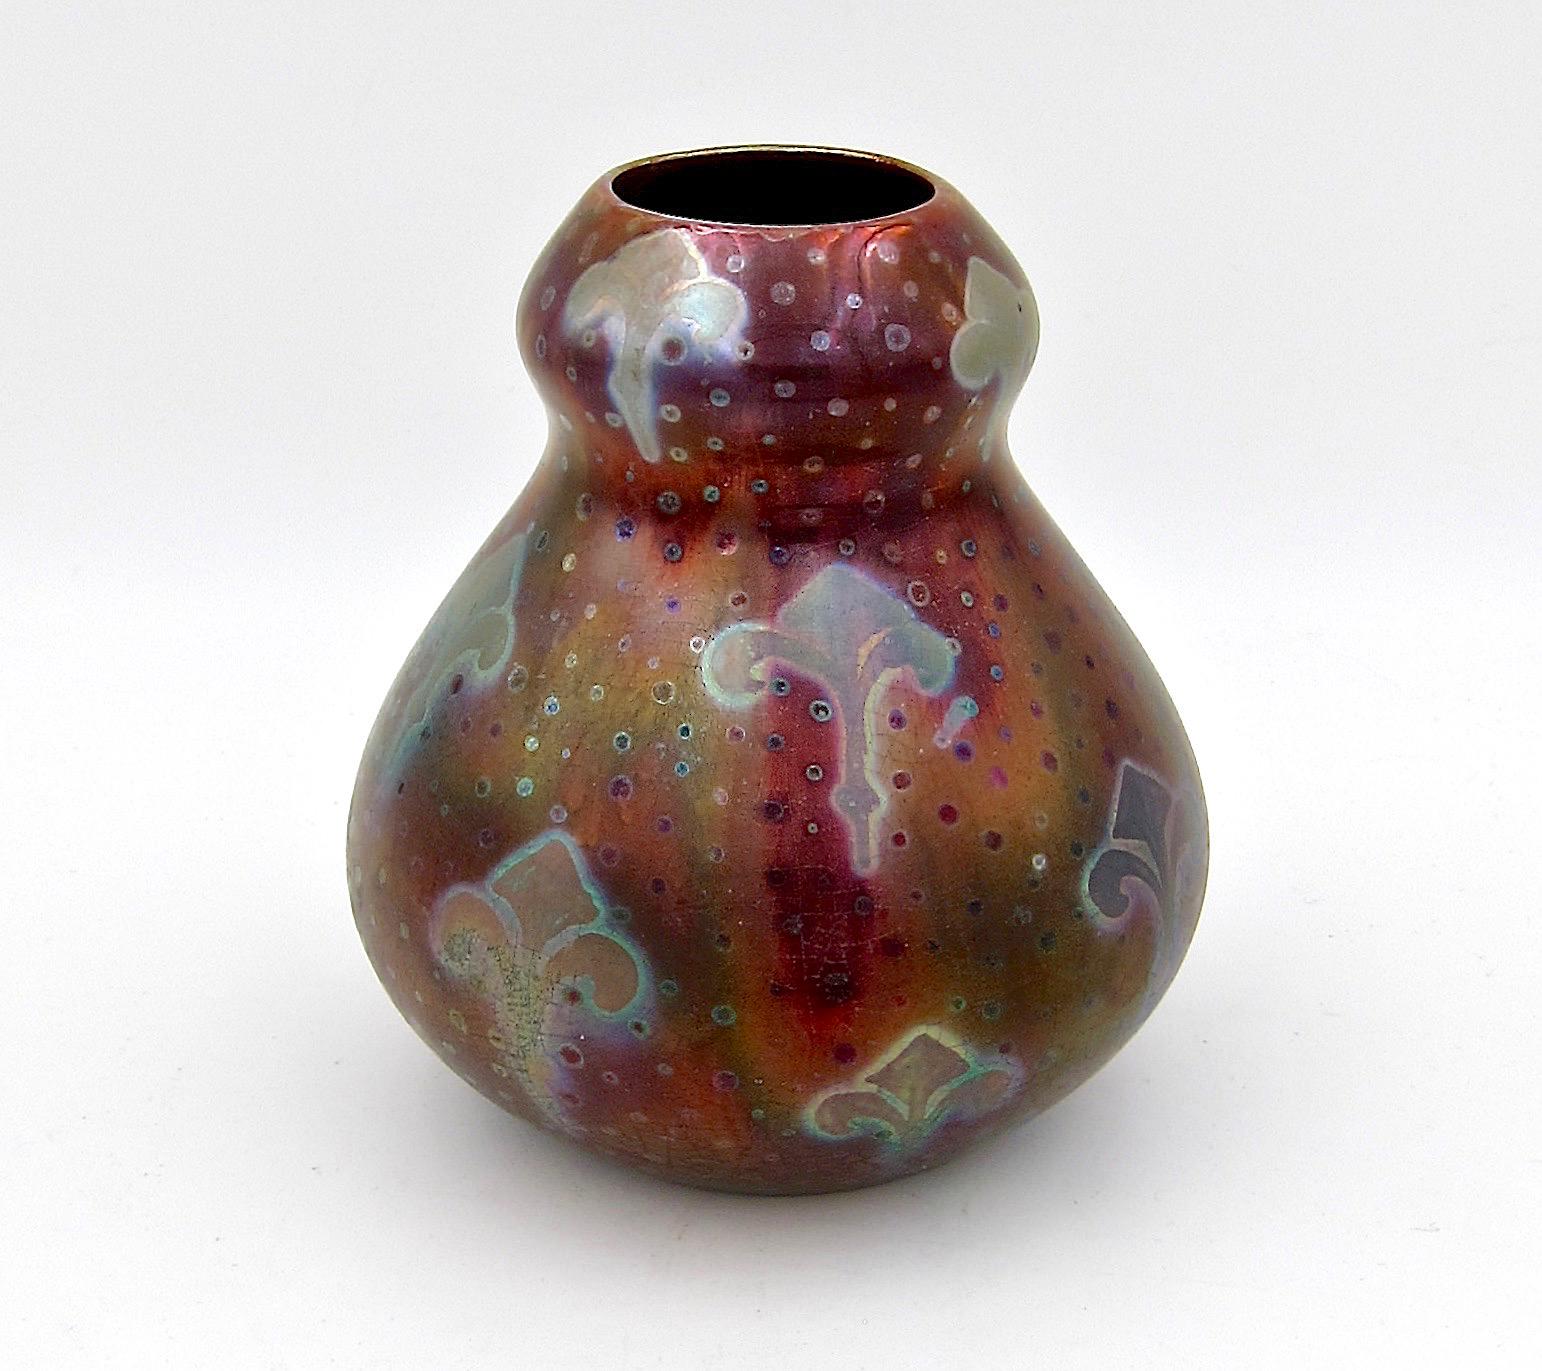 A signed American art pottery vase designed by French ceramicist Jacques Sicard (1865–1923) for Weller Pottery of Zanesville, Ohio, between 1901 and 1907. 

The antique earthenware vase is a double gourd form decorated by hand with iridescent dots